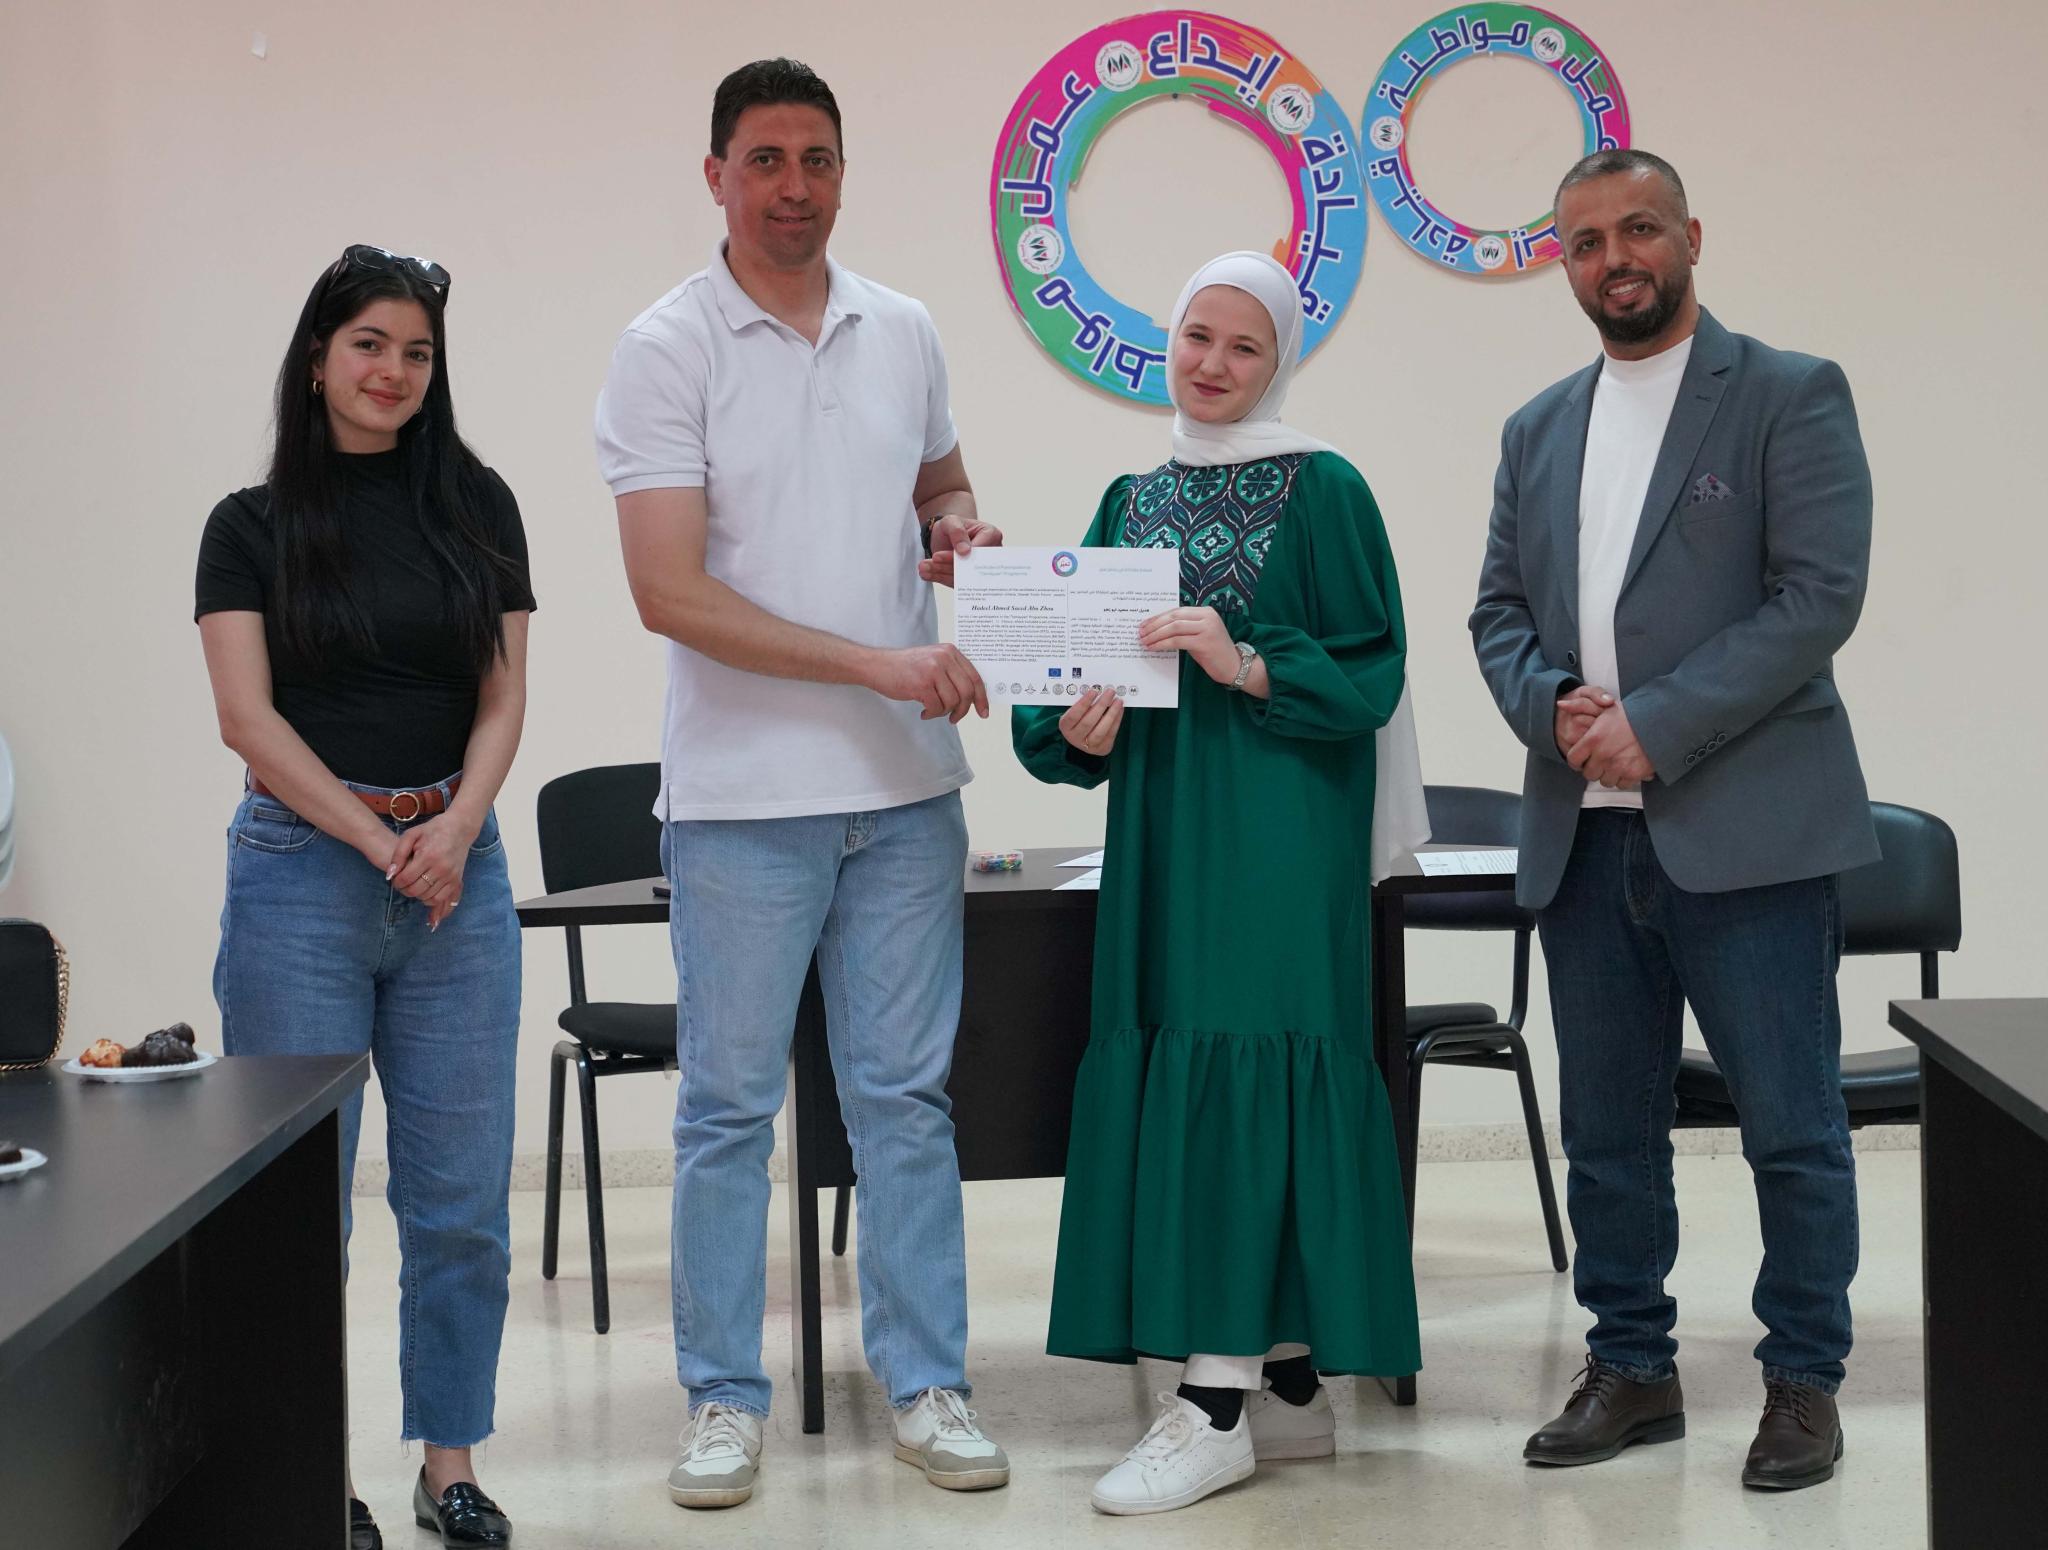 The Arab American University and Sharek Forum Hold an Event to Award Certificates of Excellence